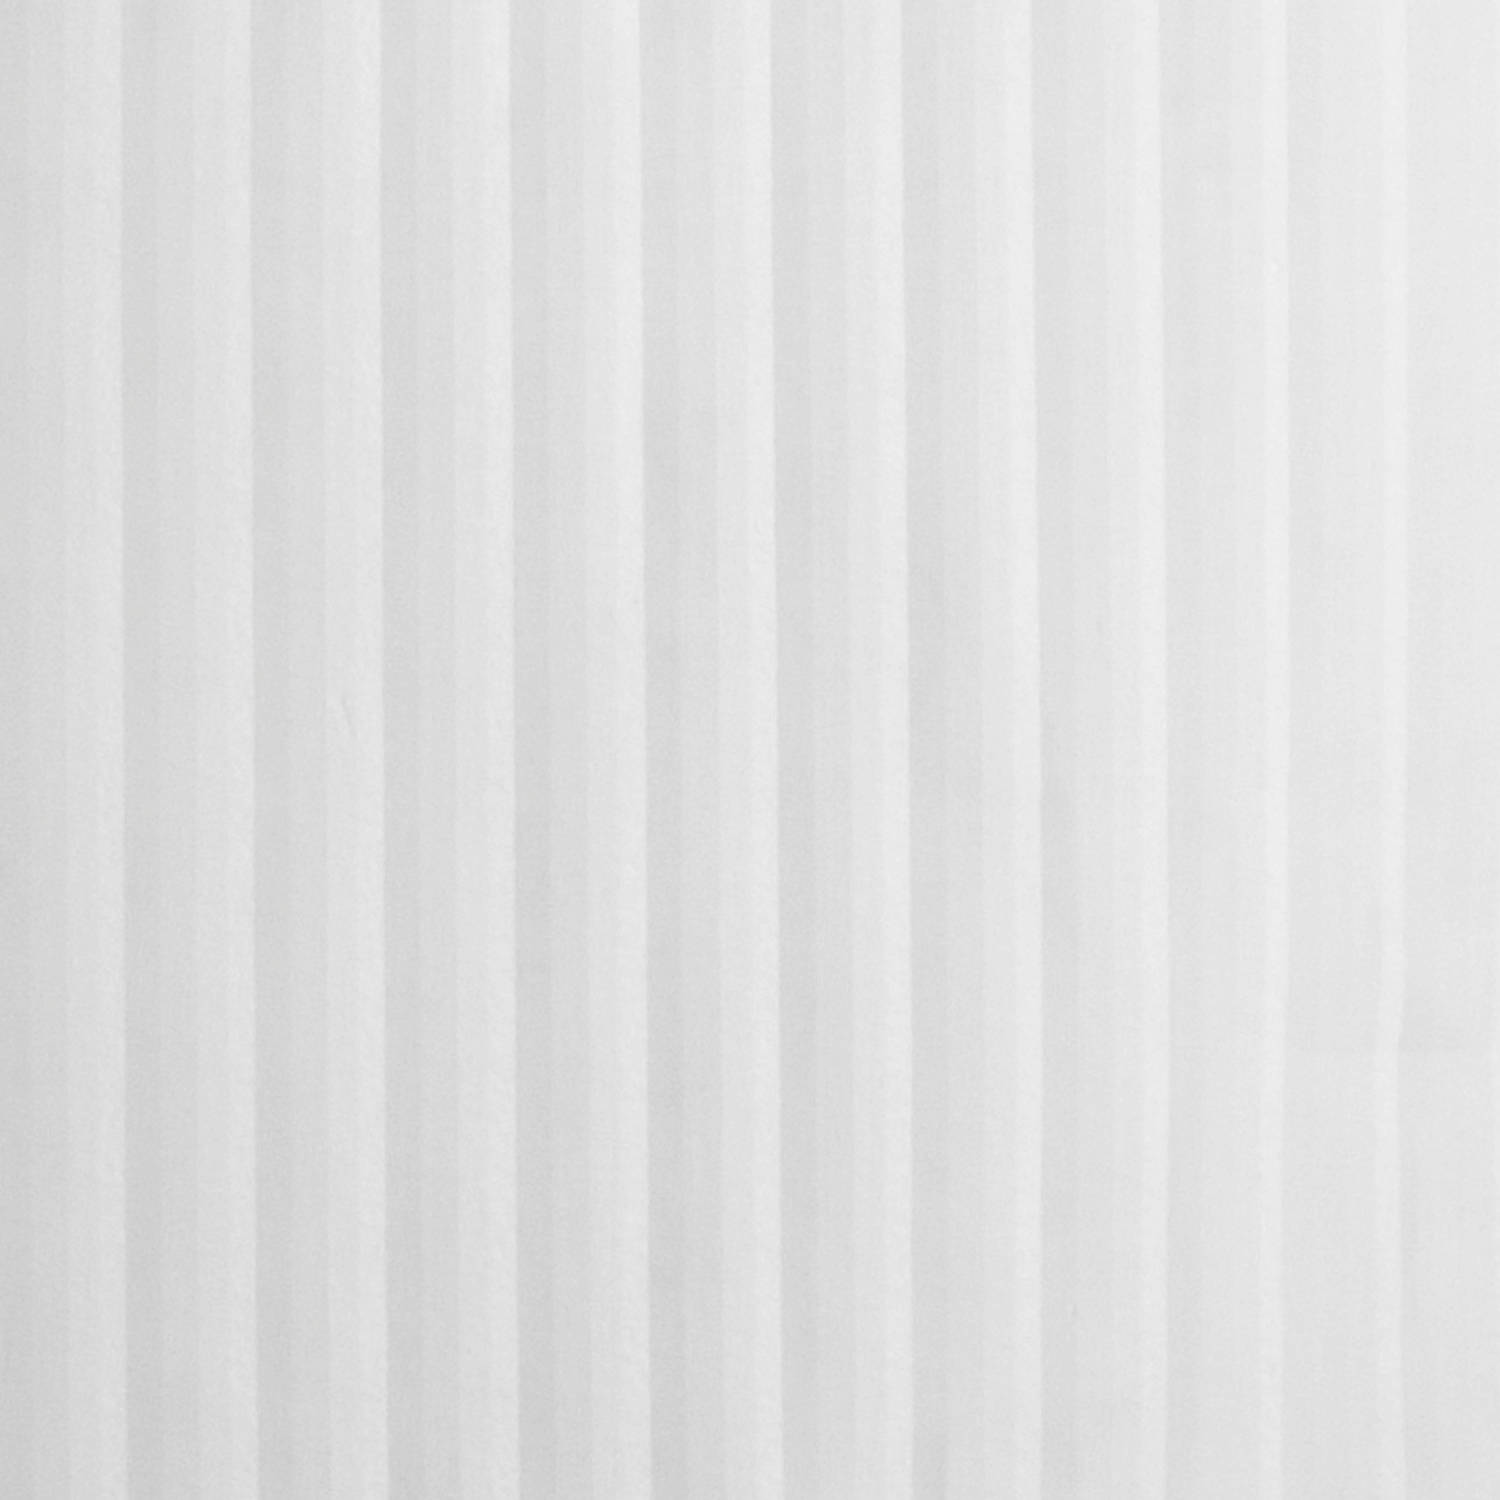 Better Homes and Gardens Elise Woven Stripe Sheer Window Panel - image 3 of 3